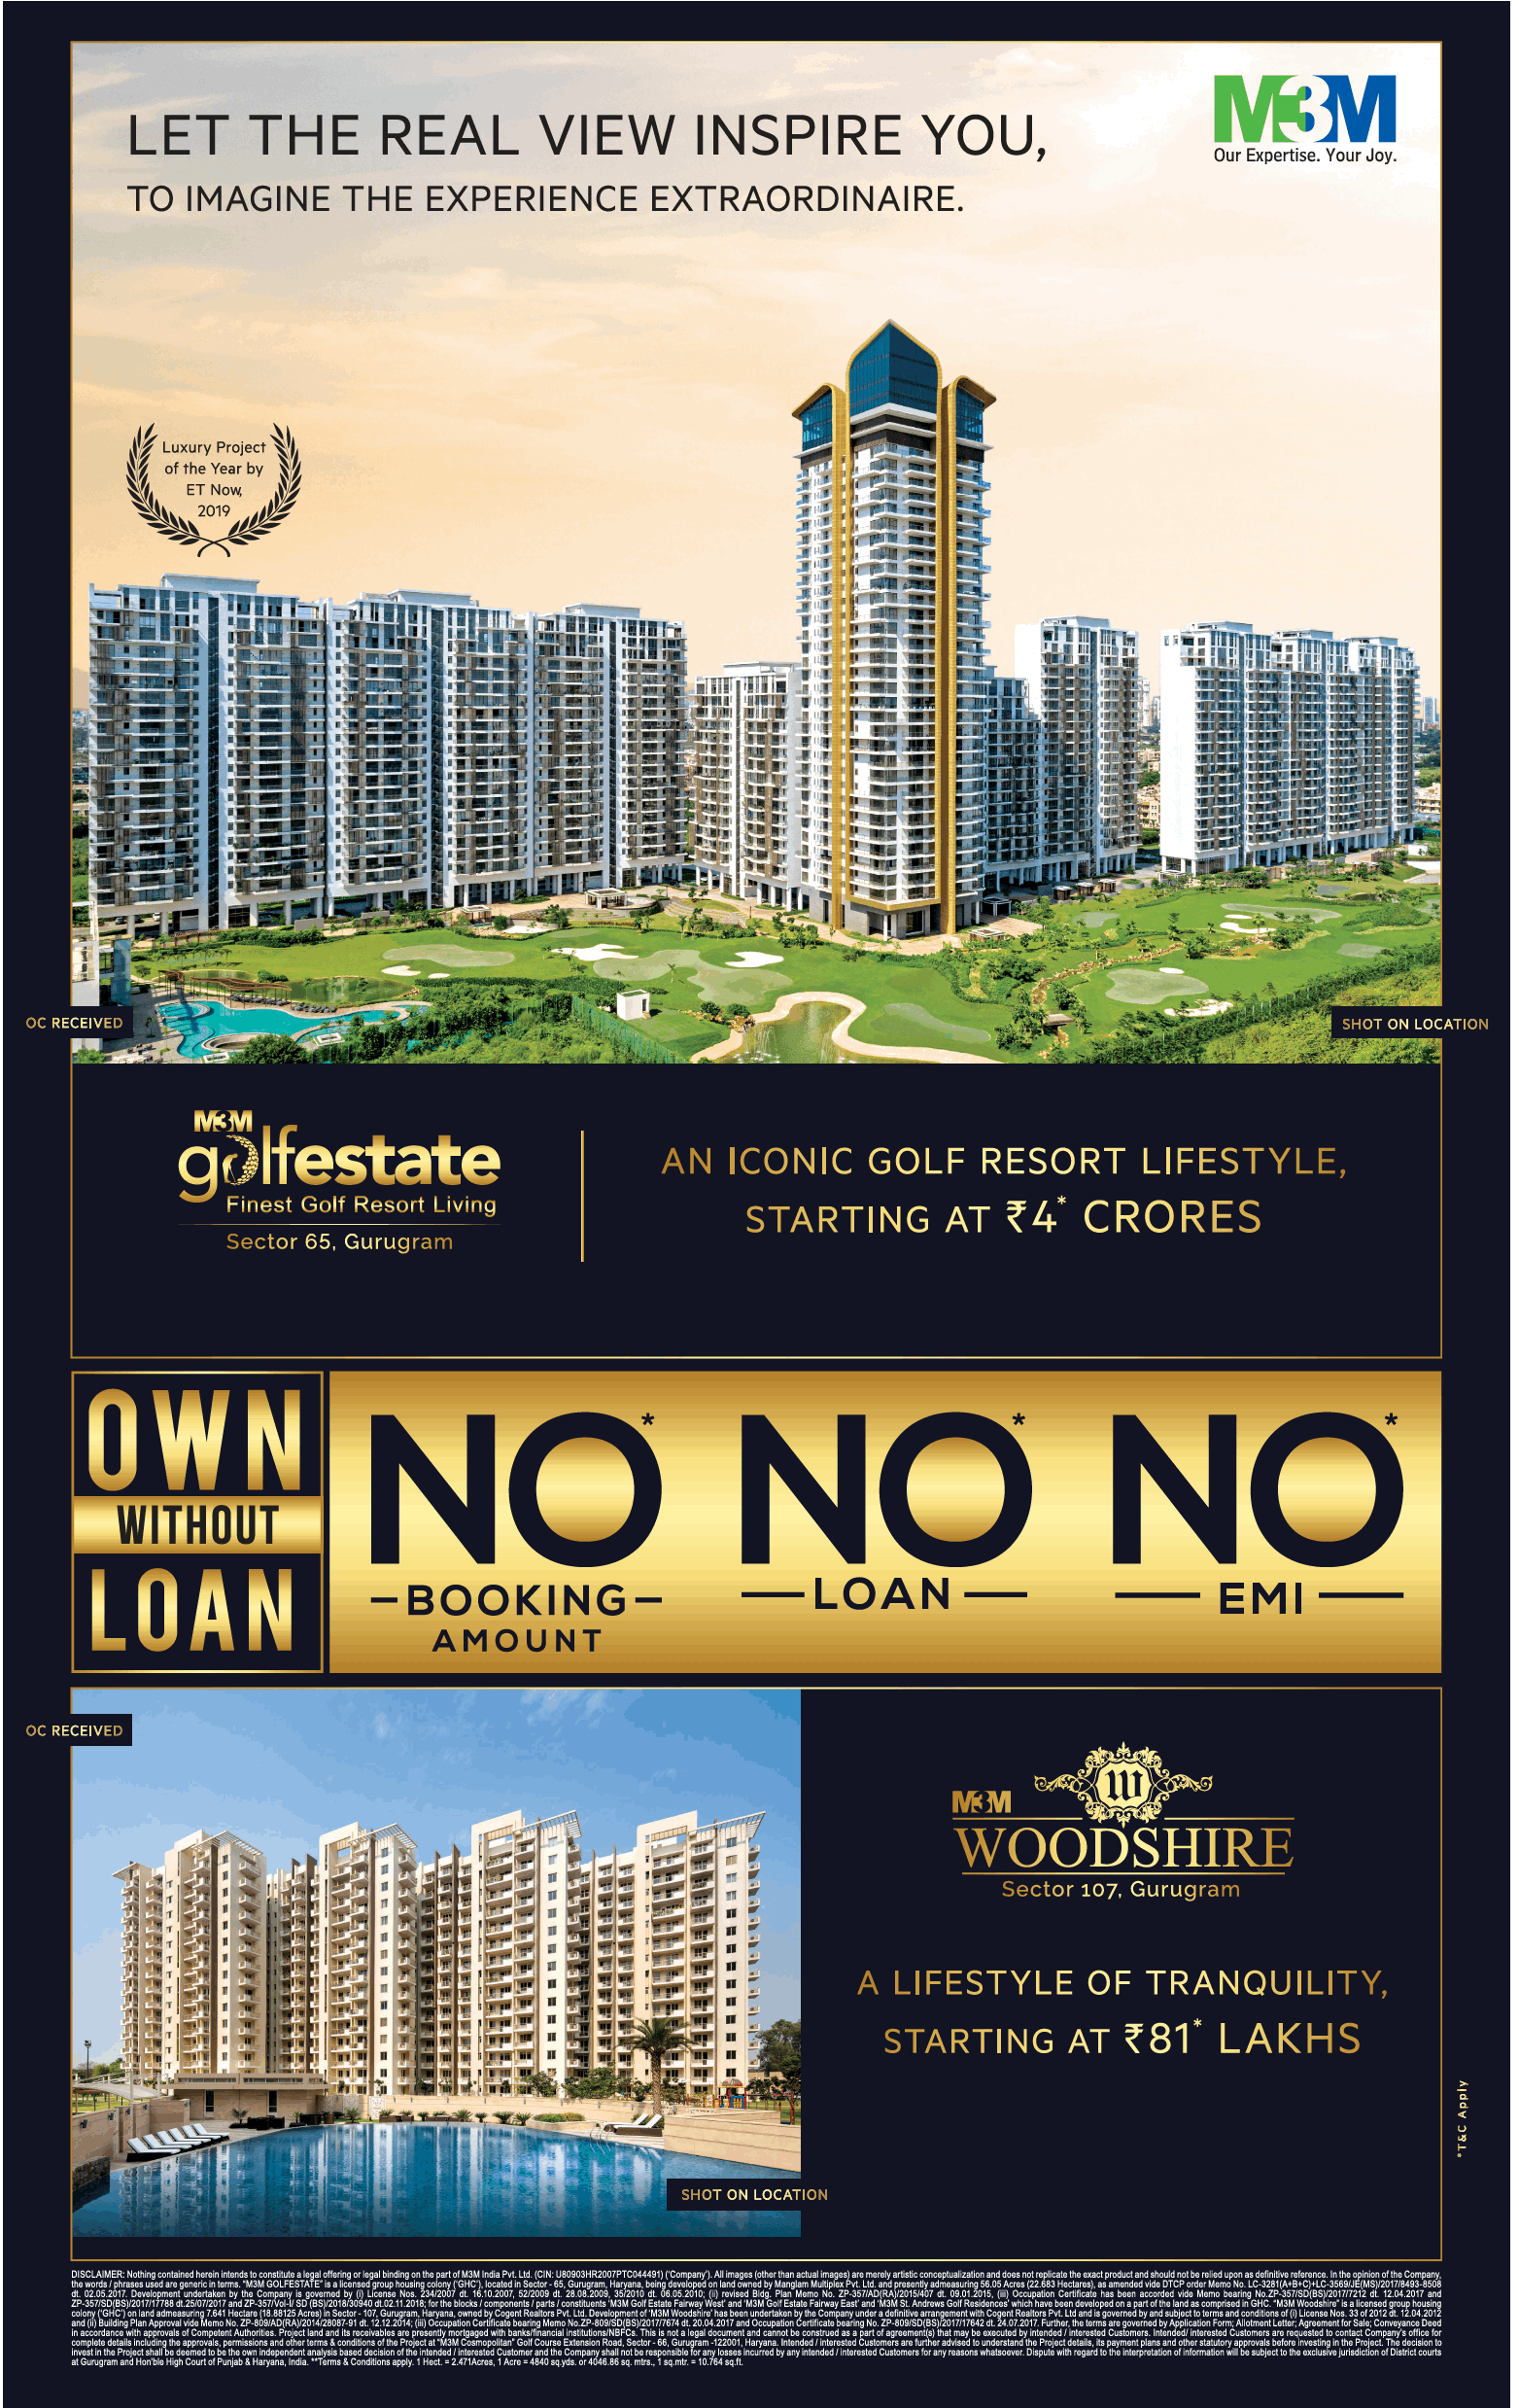 No booking amount, no loan, no EMI scheme at M3M Golf Estate and Woodshire in Gurgaon Update